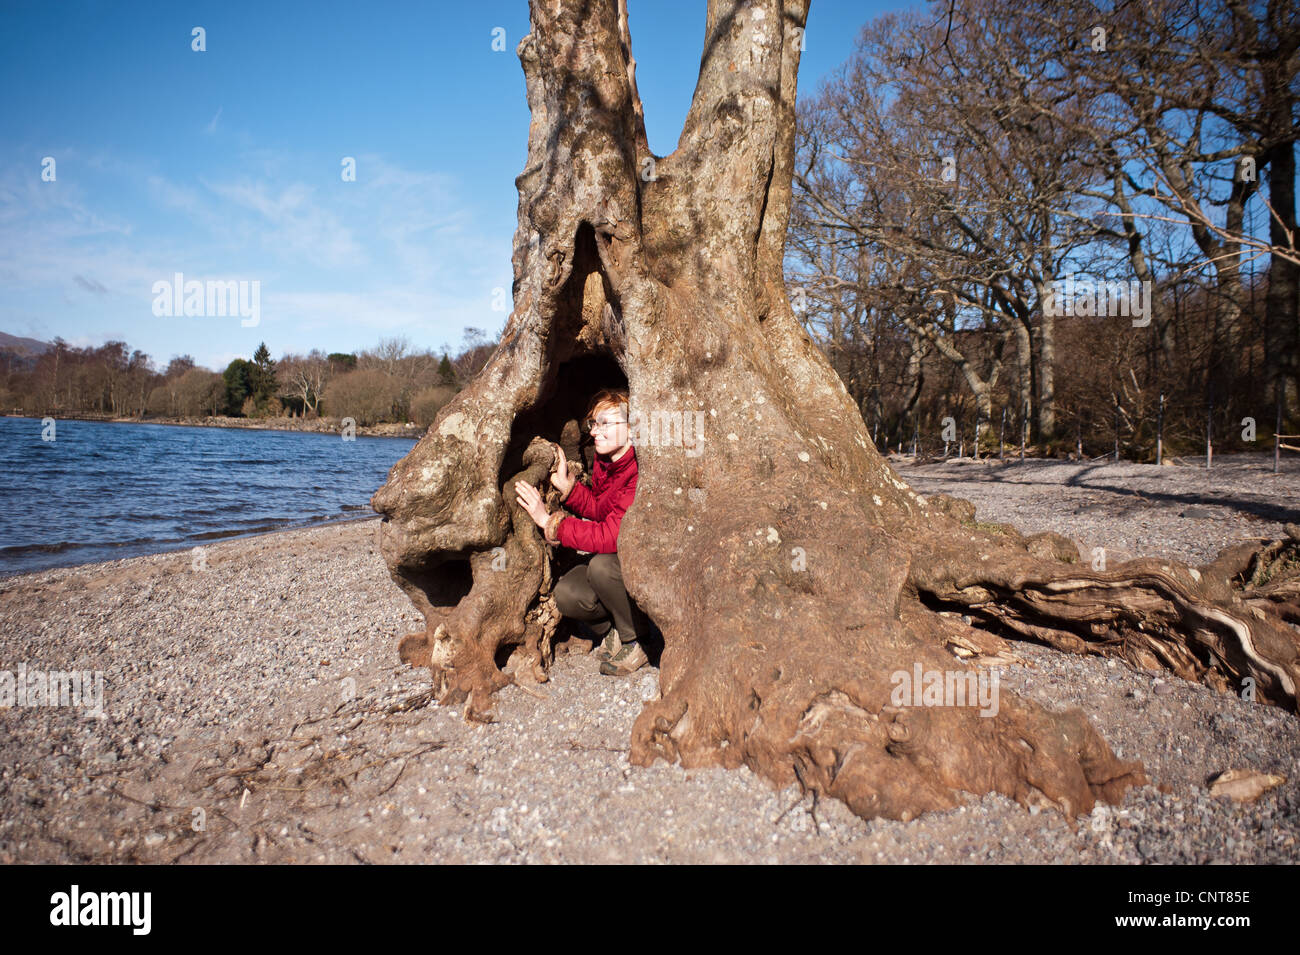 A girl hides inside a tree trunk on the shore of Loch Lomond on the route of the West Highland Way in Scotland Stock Photo